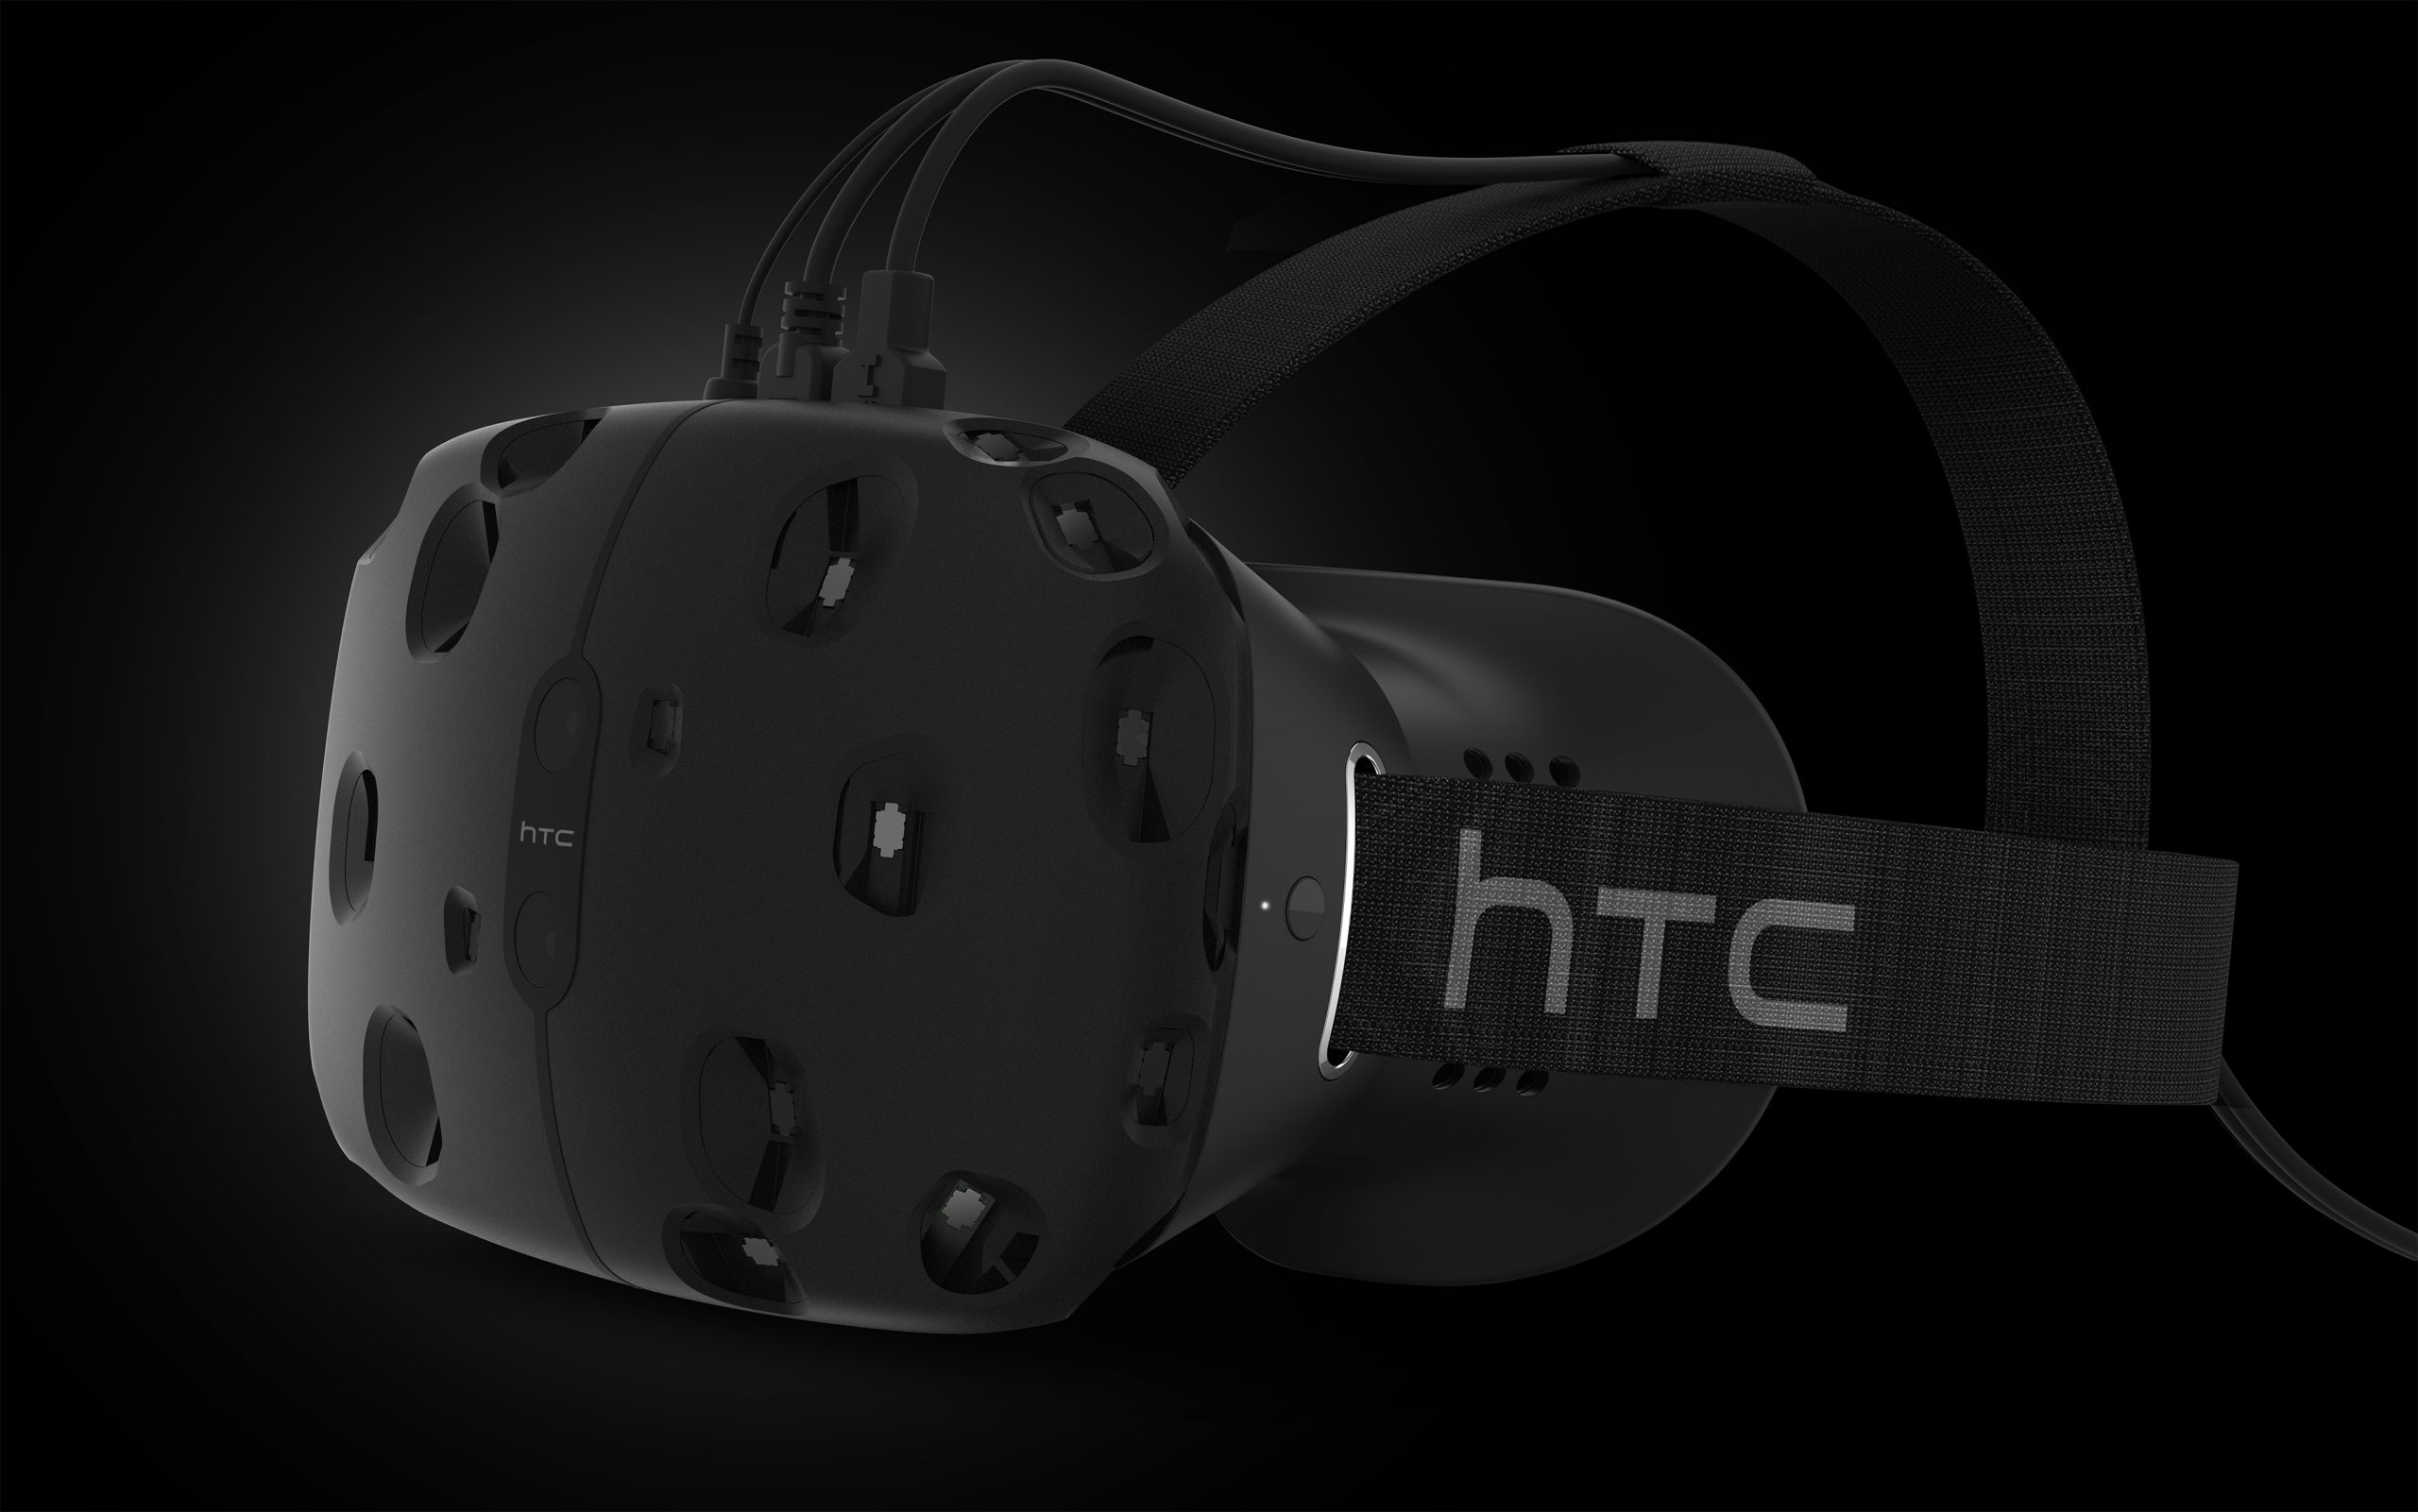 Why Valve Ditched Oculus Rift and Partnered with HTC